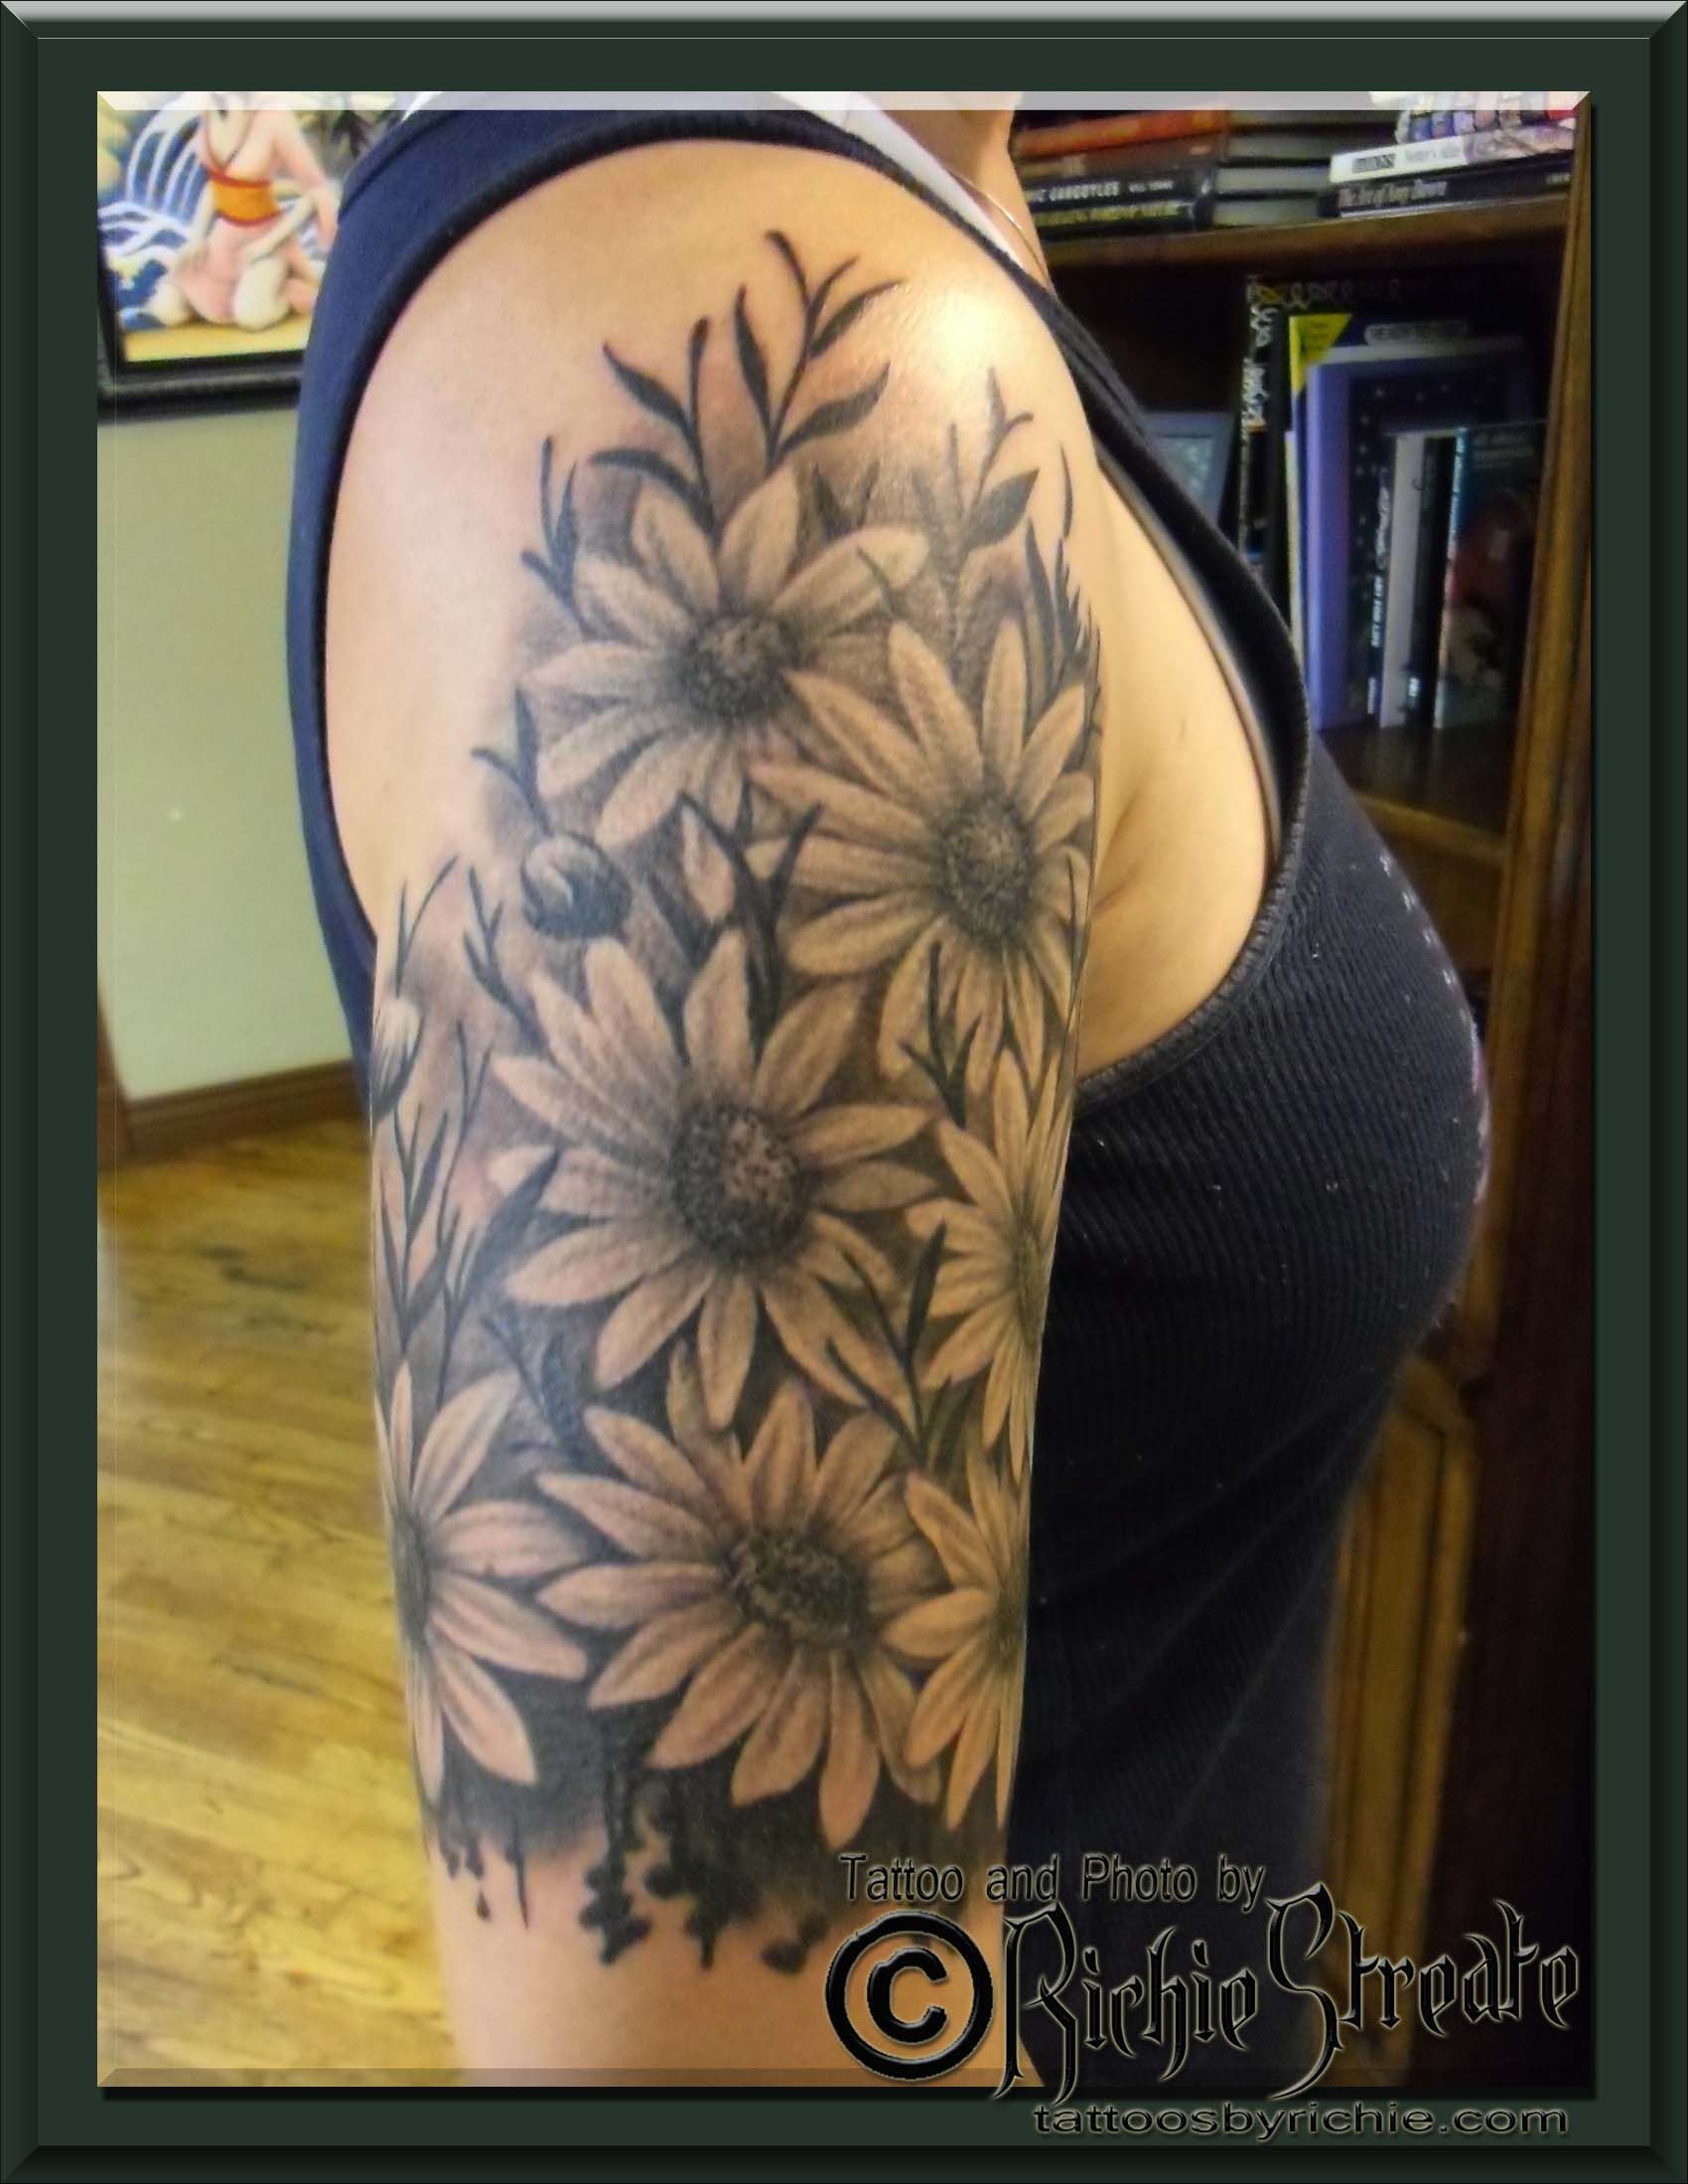 Would love to one day get a sunflower like this on my right ribs and have moms s